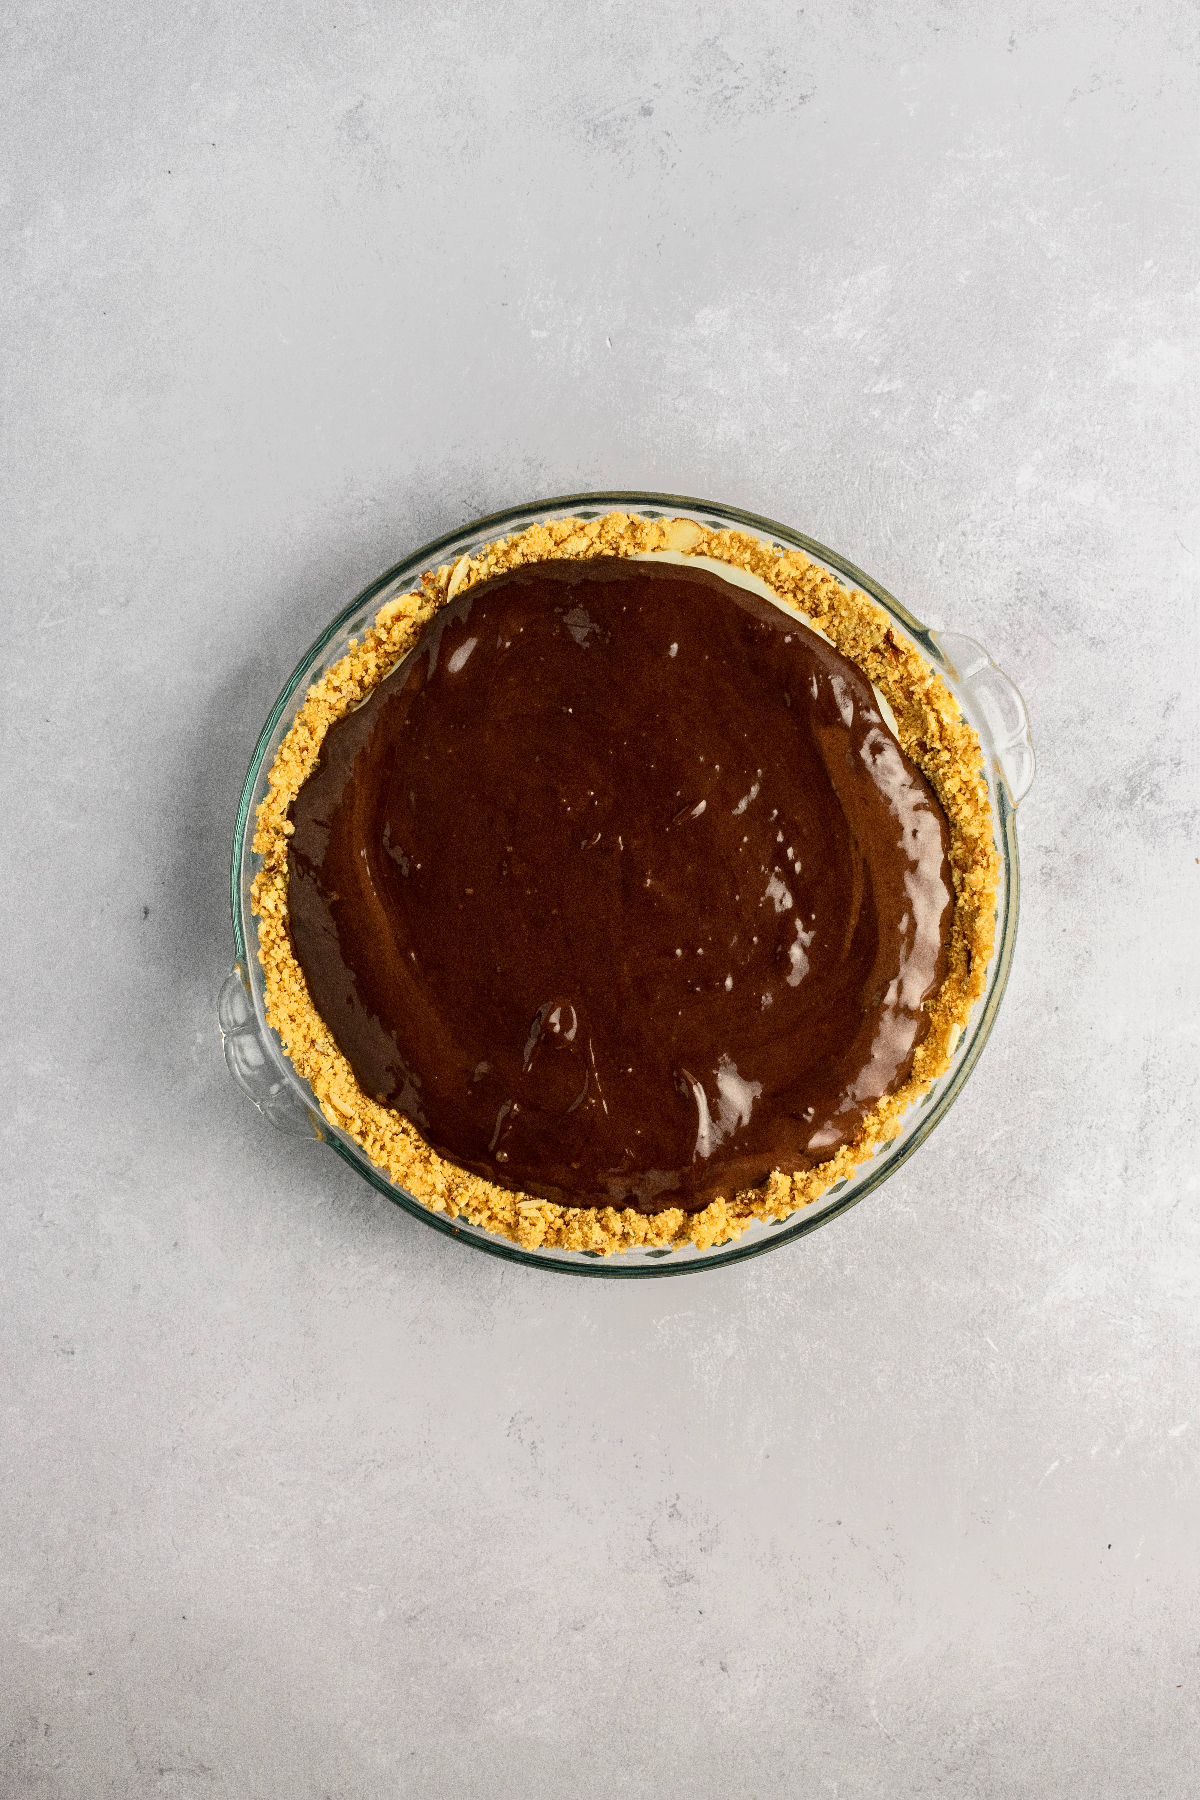 Chocolate ganache on top of a coconut pie.